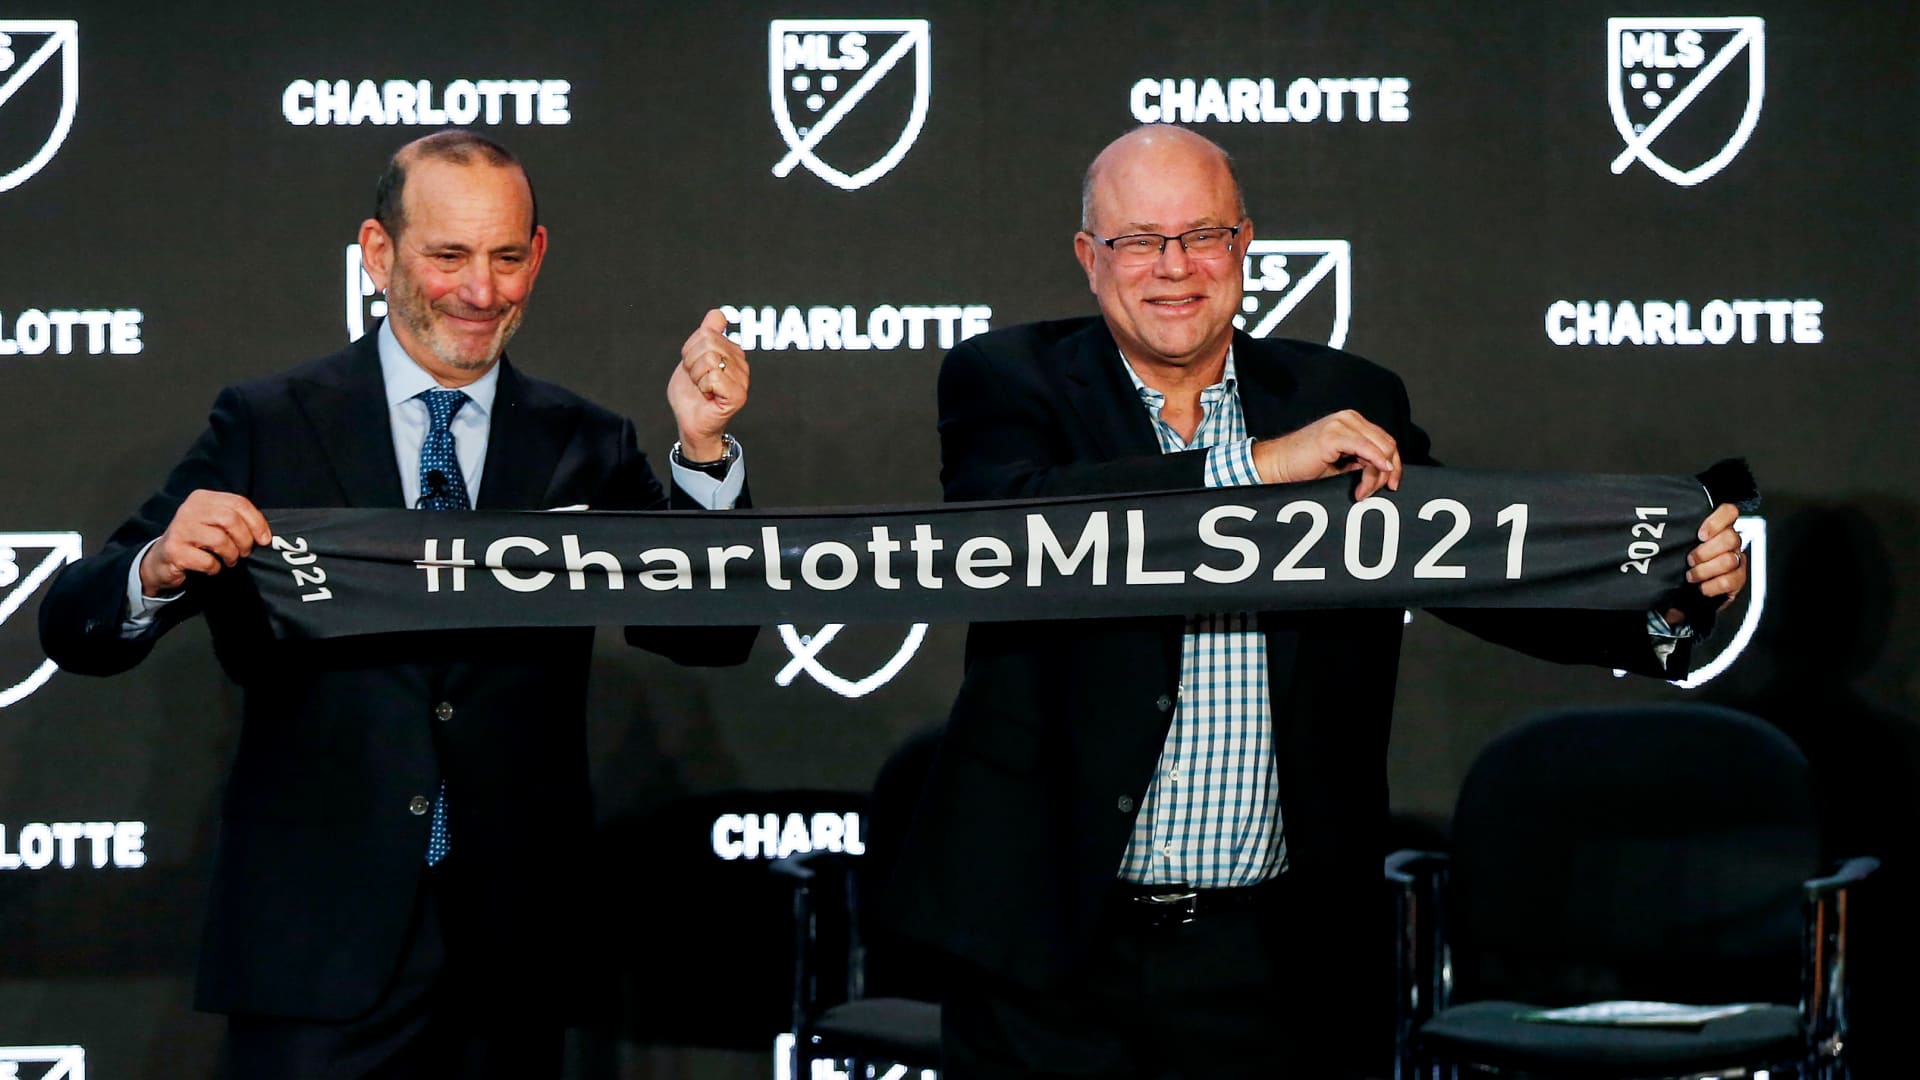 MLS Commissioner Don Garber, left, and Charlotte MLS owner David Tepper announce that Major League Soccer will be coming to Charlotte in 2021 at an event in Charlotte, N.C., Tuesday, Dec. 17, 2019.